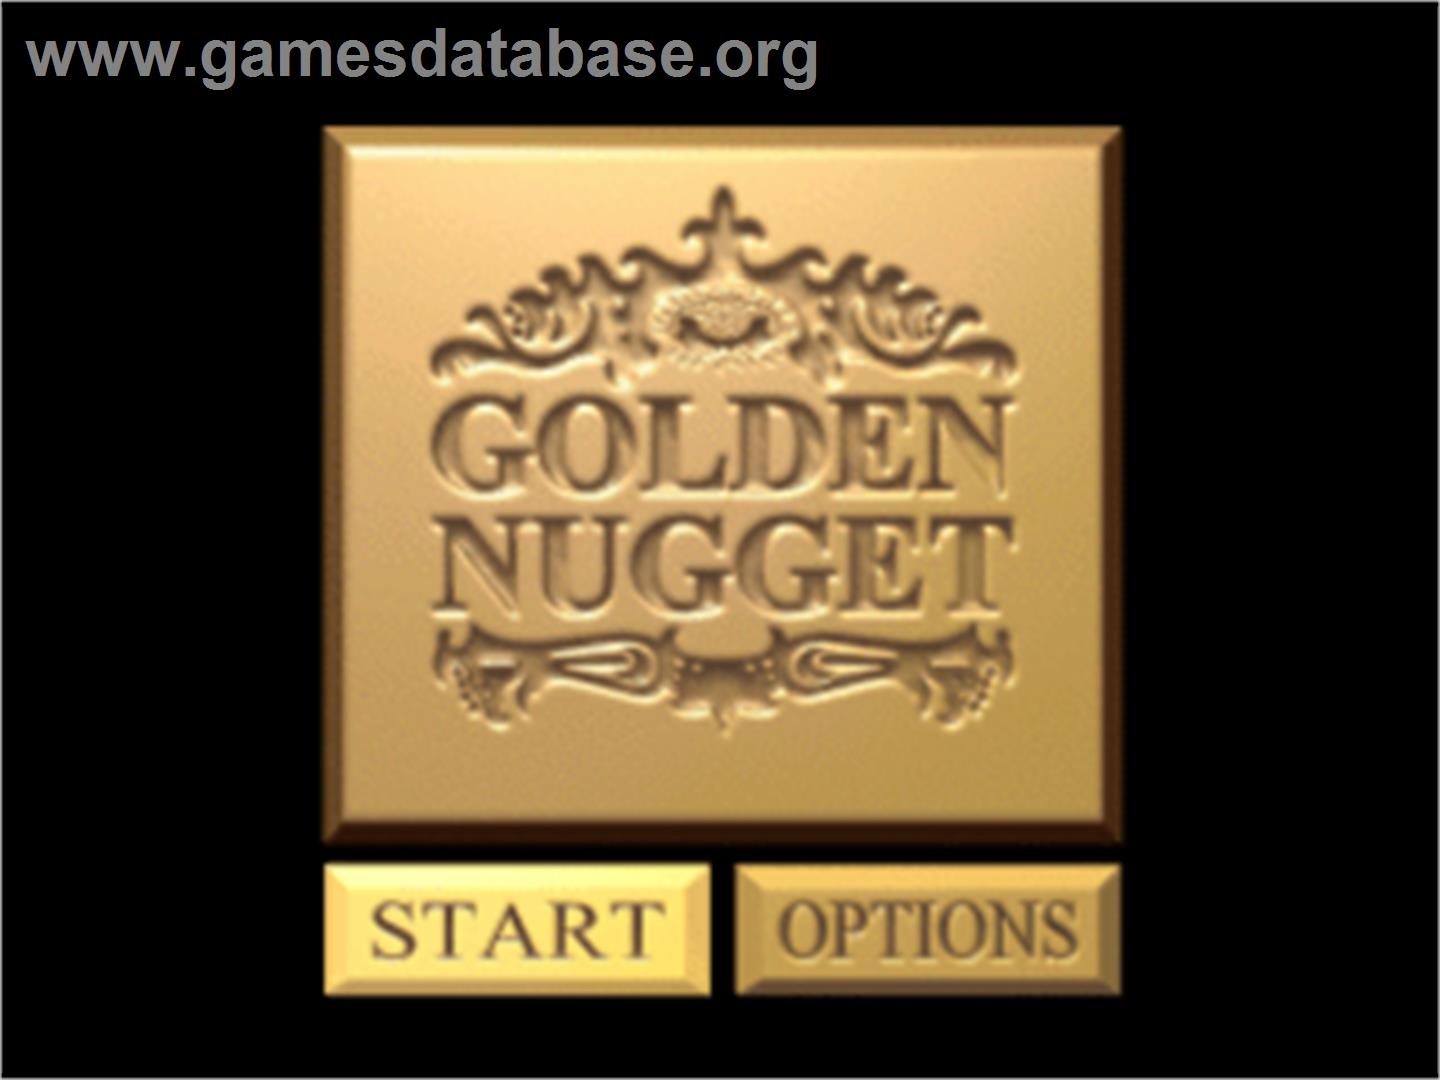 Golden Nugget - Sony Playstation - Artwork - Title Screen